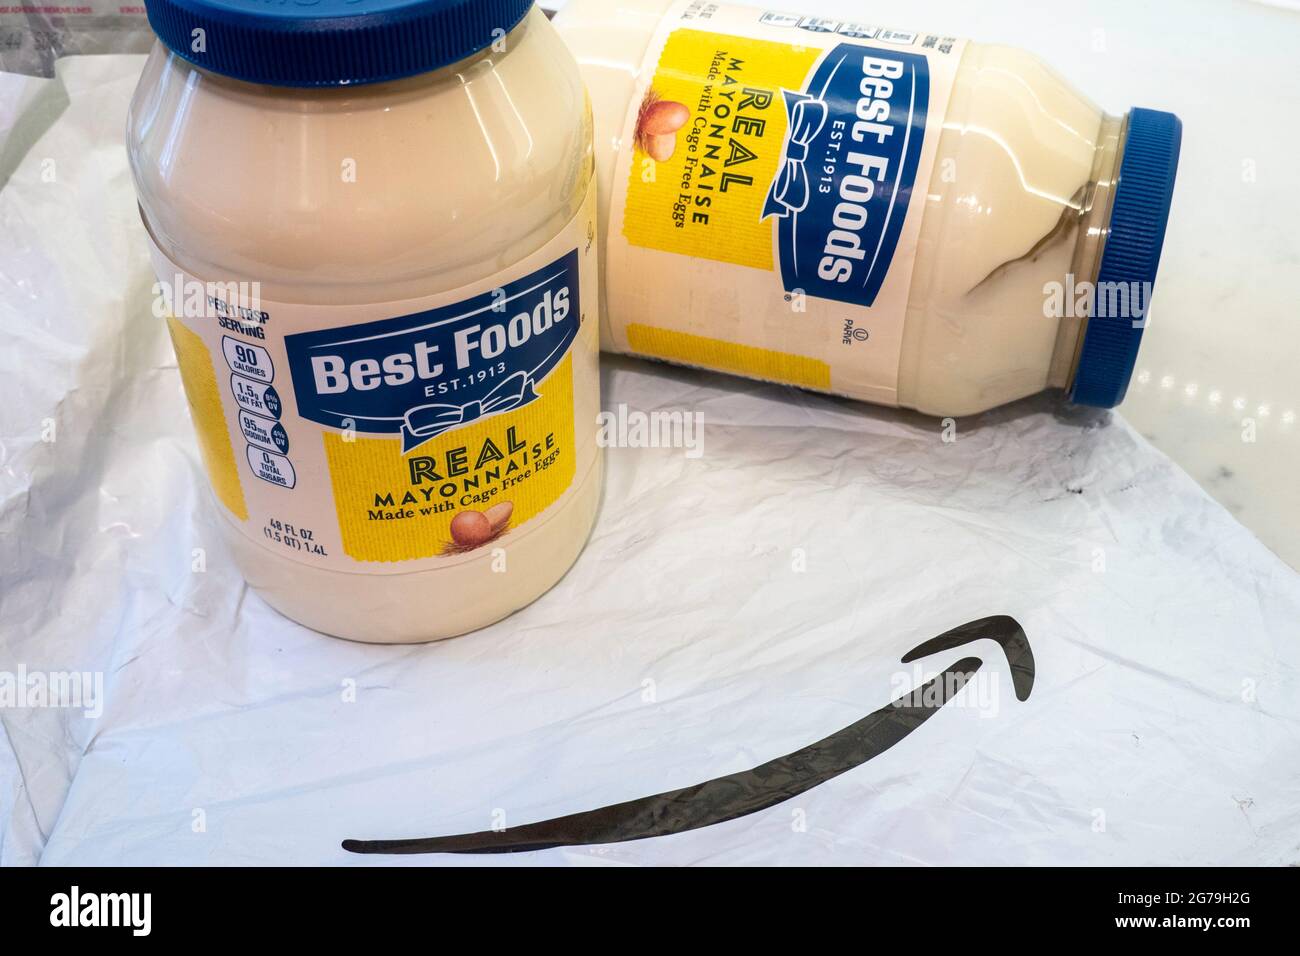 Jars of Best Foods Mayonnaise Delivered by Amazon, USA Stock Photo